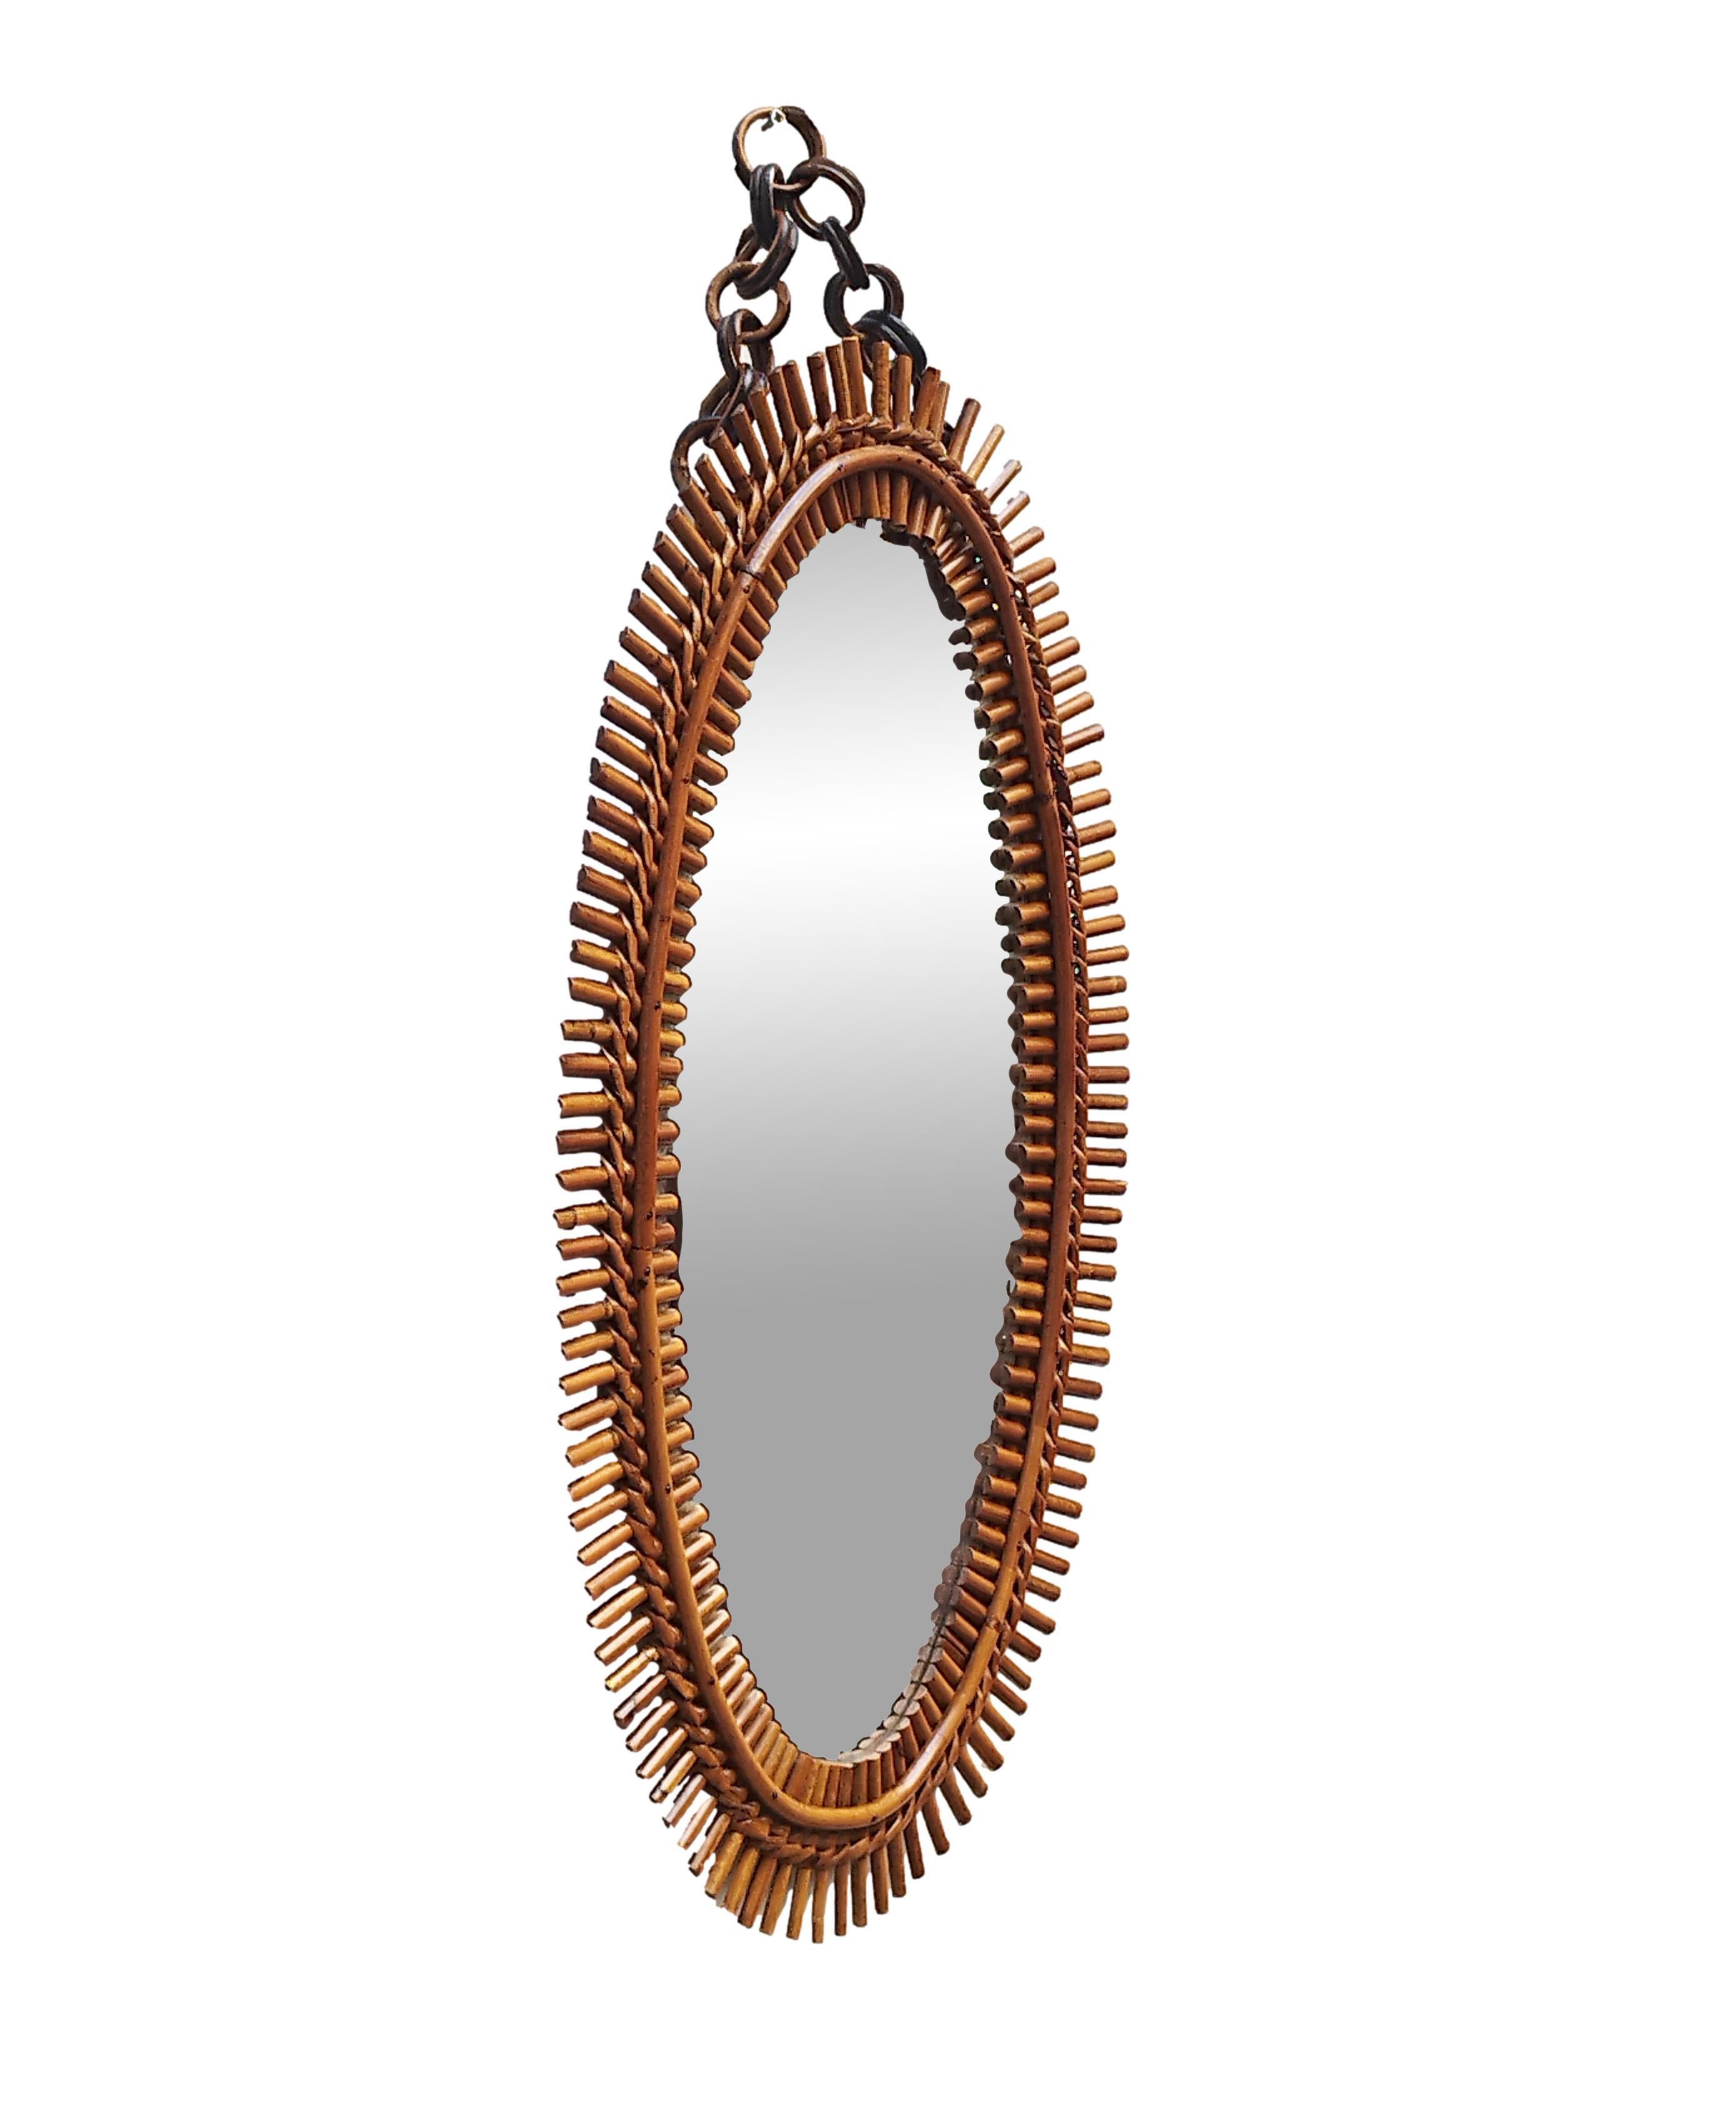  Oval bamboo wall mirror, consisting of an oval glass surrounded by an ingenious frame formed by two bamboo roundels joined by a dense weave of prickly pear prickly pear small rods arranged radially around the fulcrum of the oval mirror. Designed by